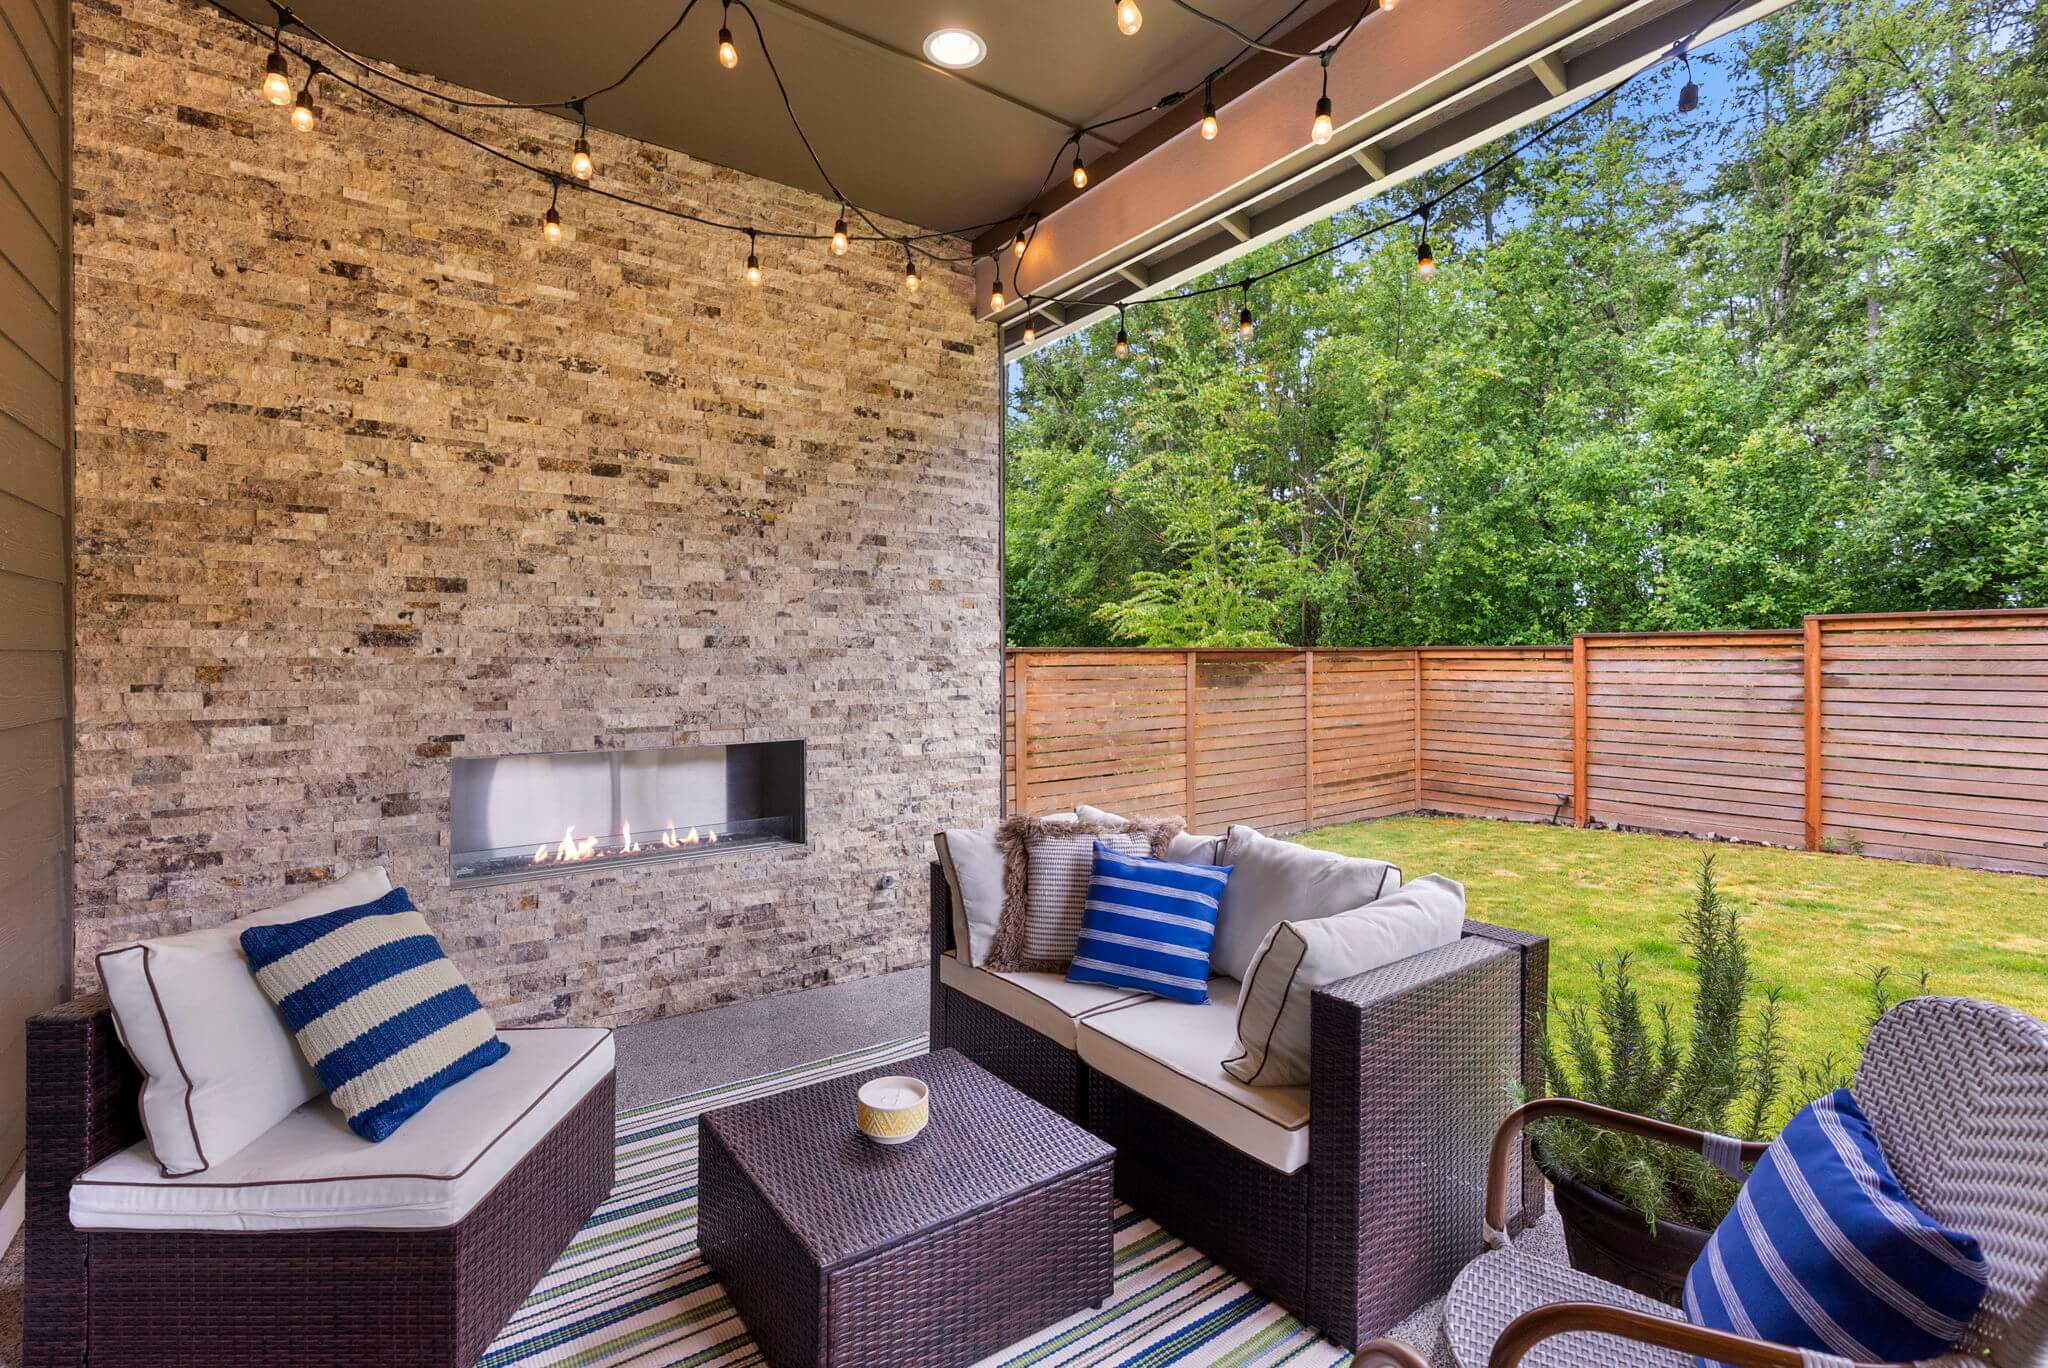 Covered patio with gas fireplace